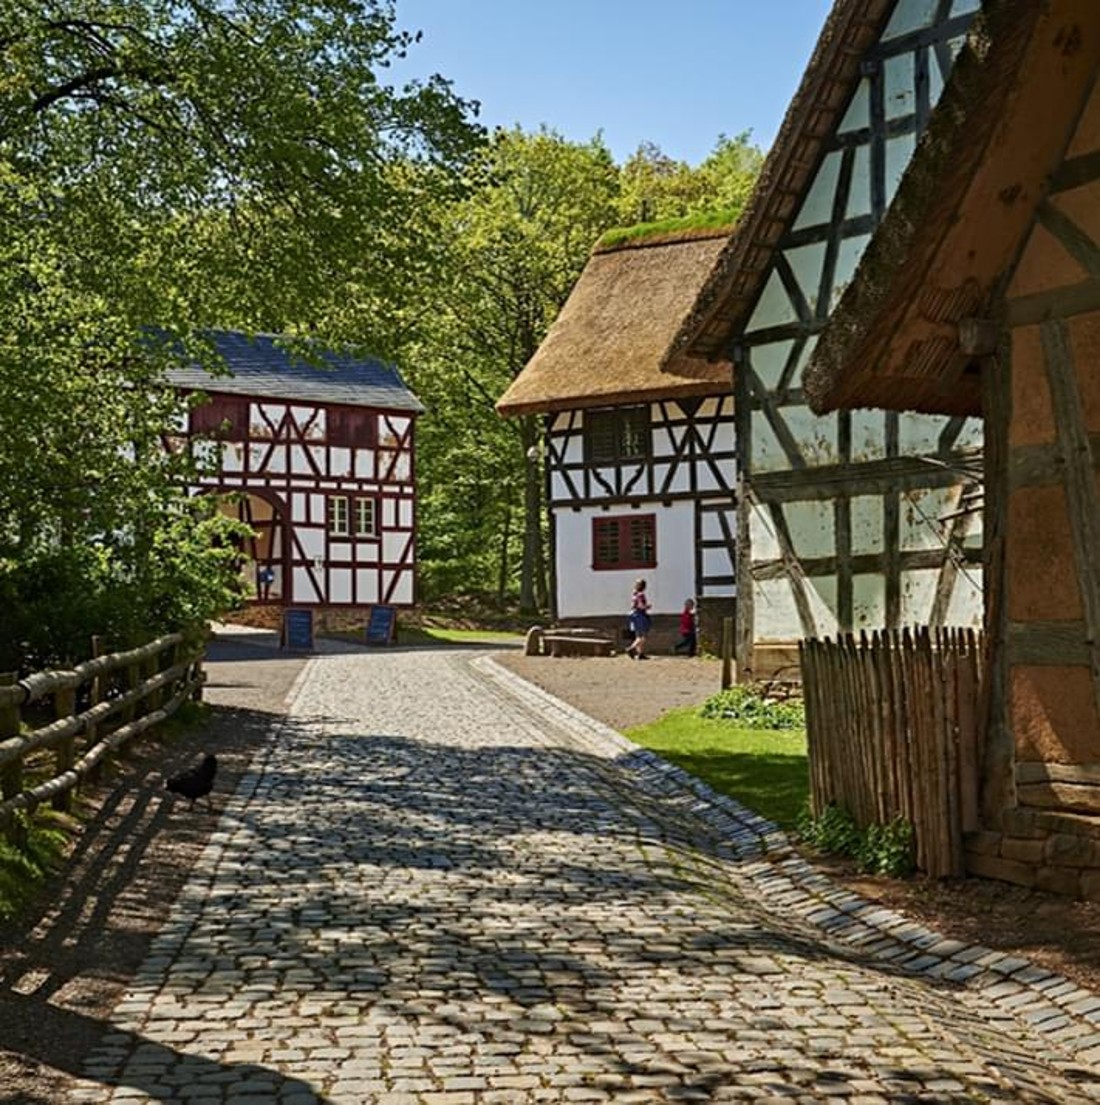 Half-timbered houses to the right of a cobblestone path